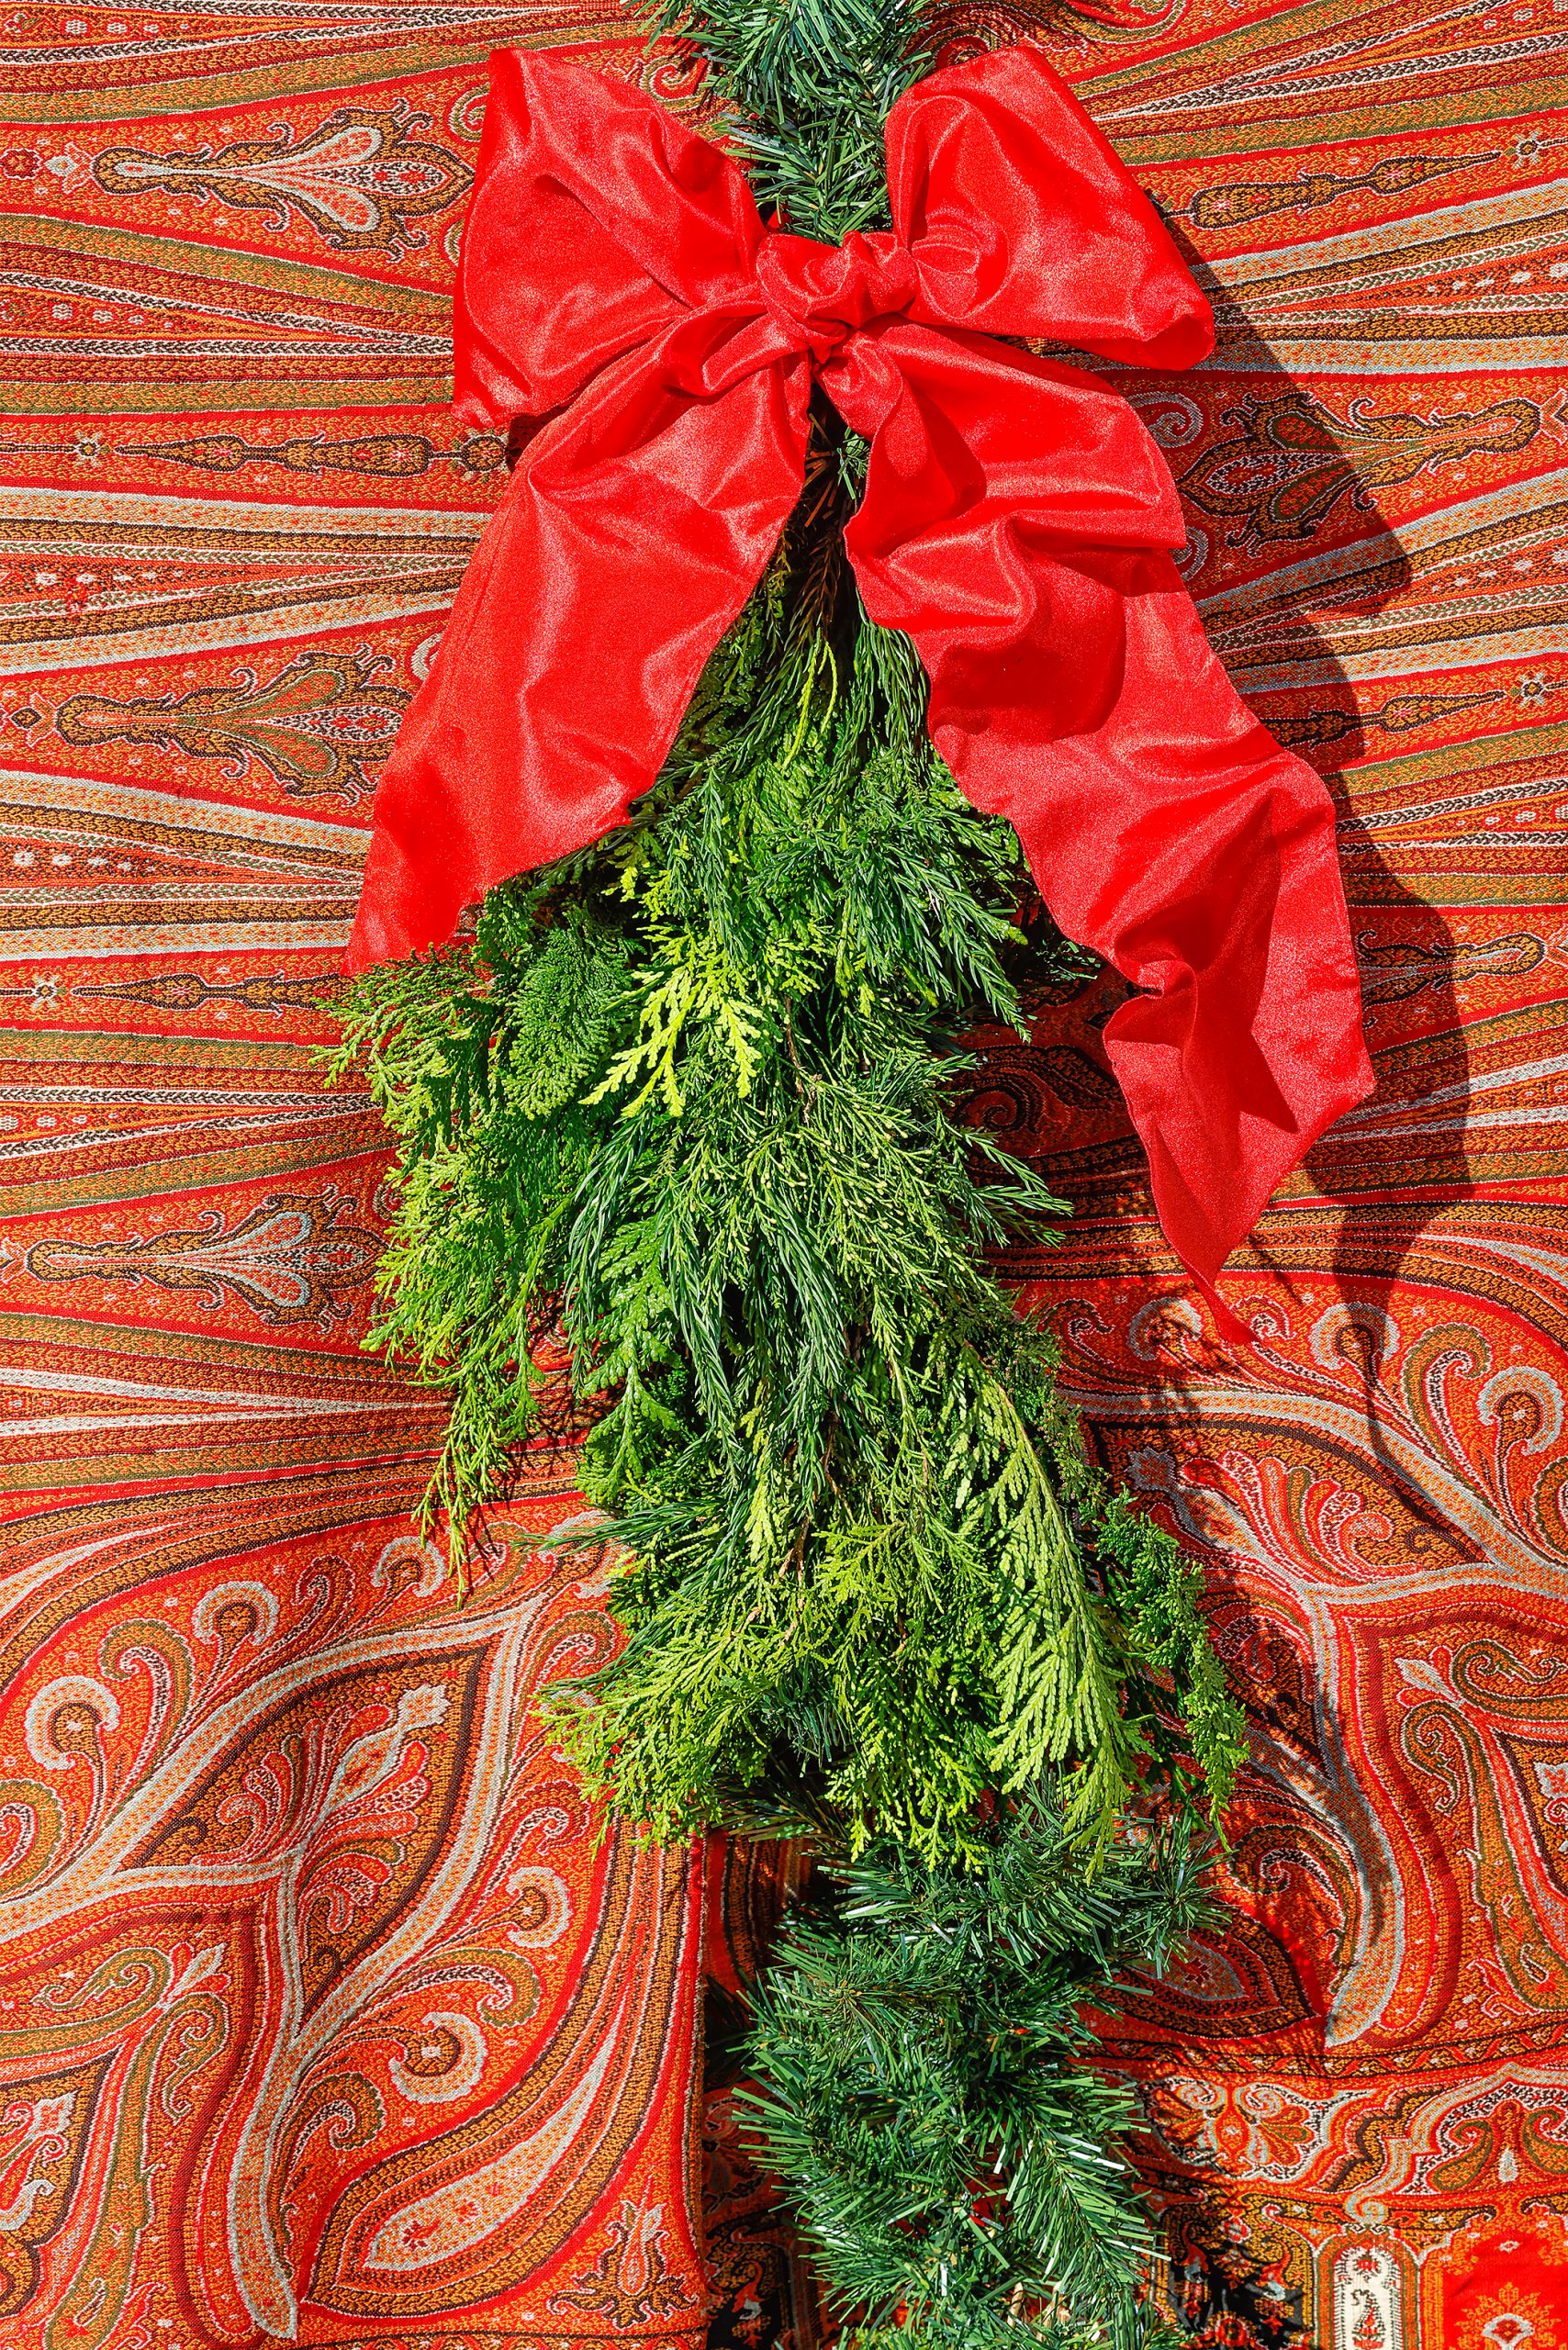 This garland sample is a mixture of local plants often used in hedges: arbor vitae, Leyland cypress, and cedar.